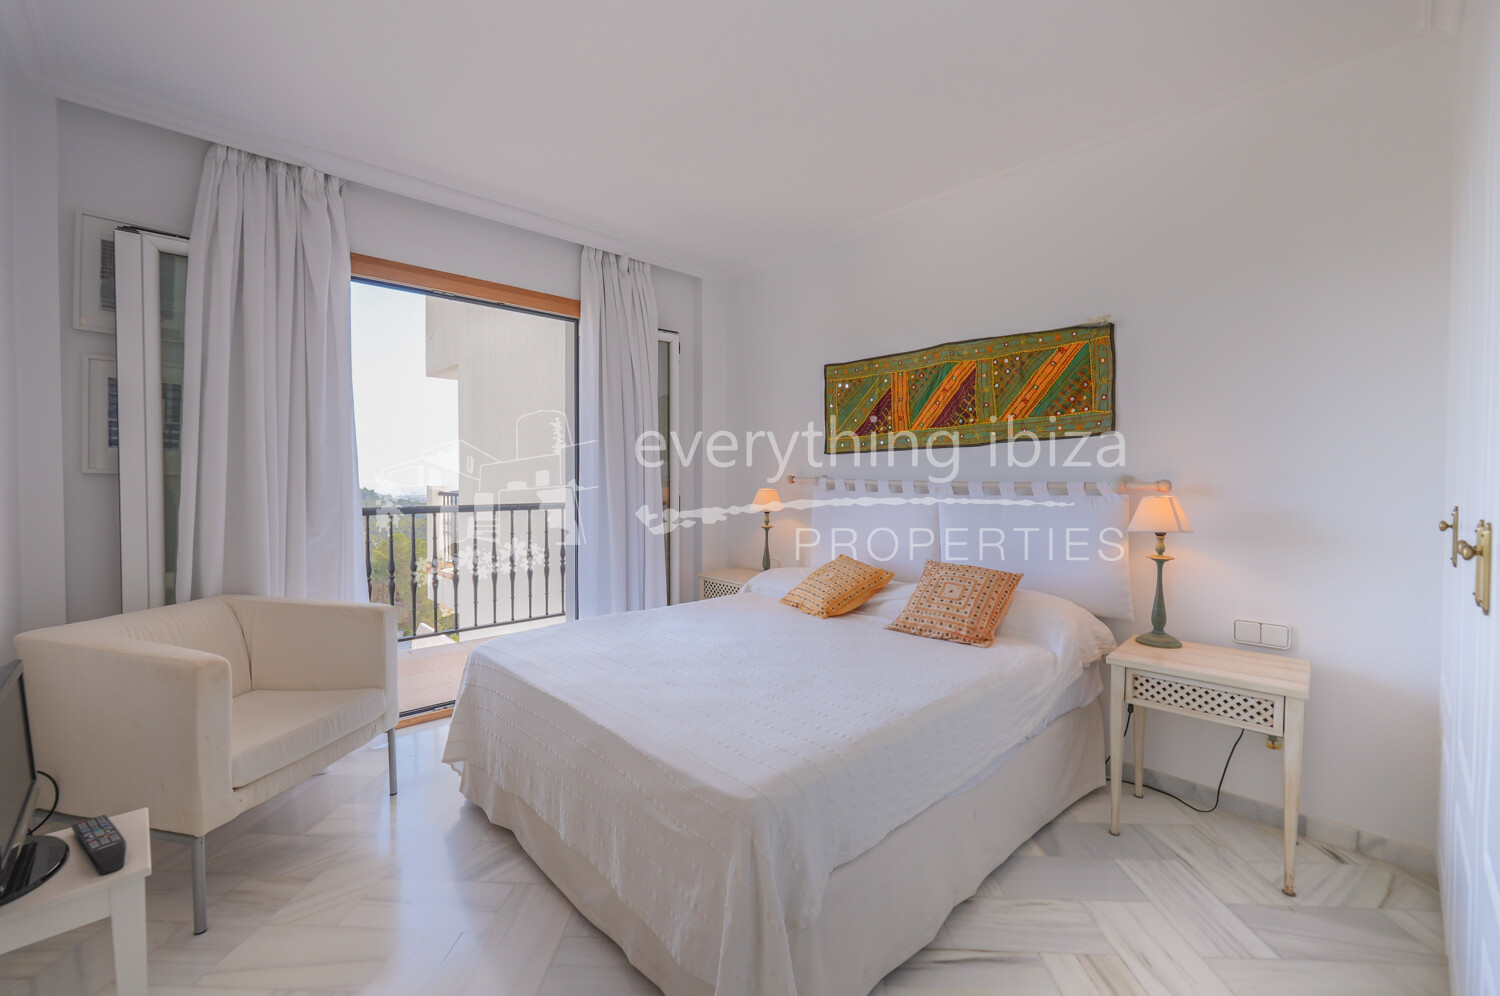 Two Stunning Penthouse Apartments with Super Views in Exclusive Can Furnet, ref. 1724, for sale in Ibiza by everything ibiza Properties